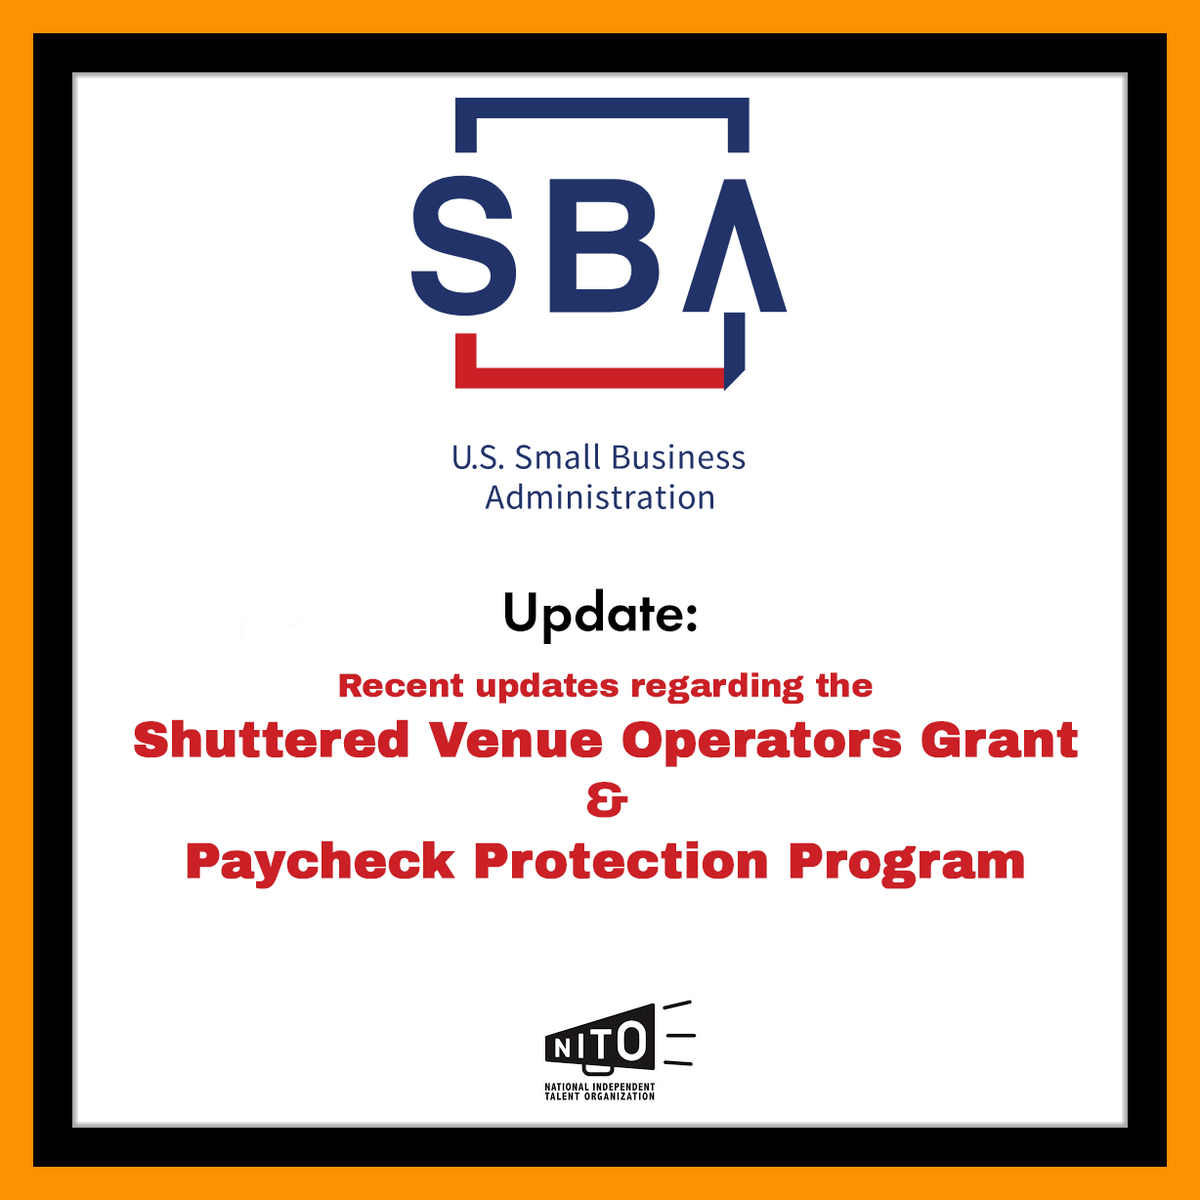 Latest updates regarding Shuttered Venue Operators Grant & Paycheck Protection Program…

SVOG- @SBAgov updated the FAQ on 2/28: bit.ly/3b7m7QX

PPP- Exclusive 14-day application window for businesses & nonprofits w/  <20 employees began on 2/24: bit.ly/3kE6aos